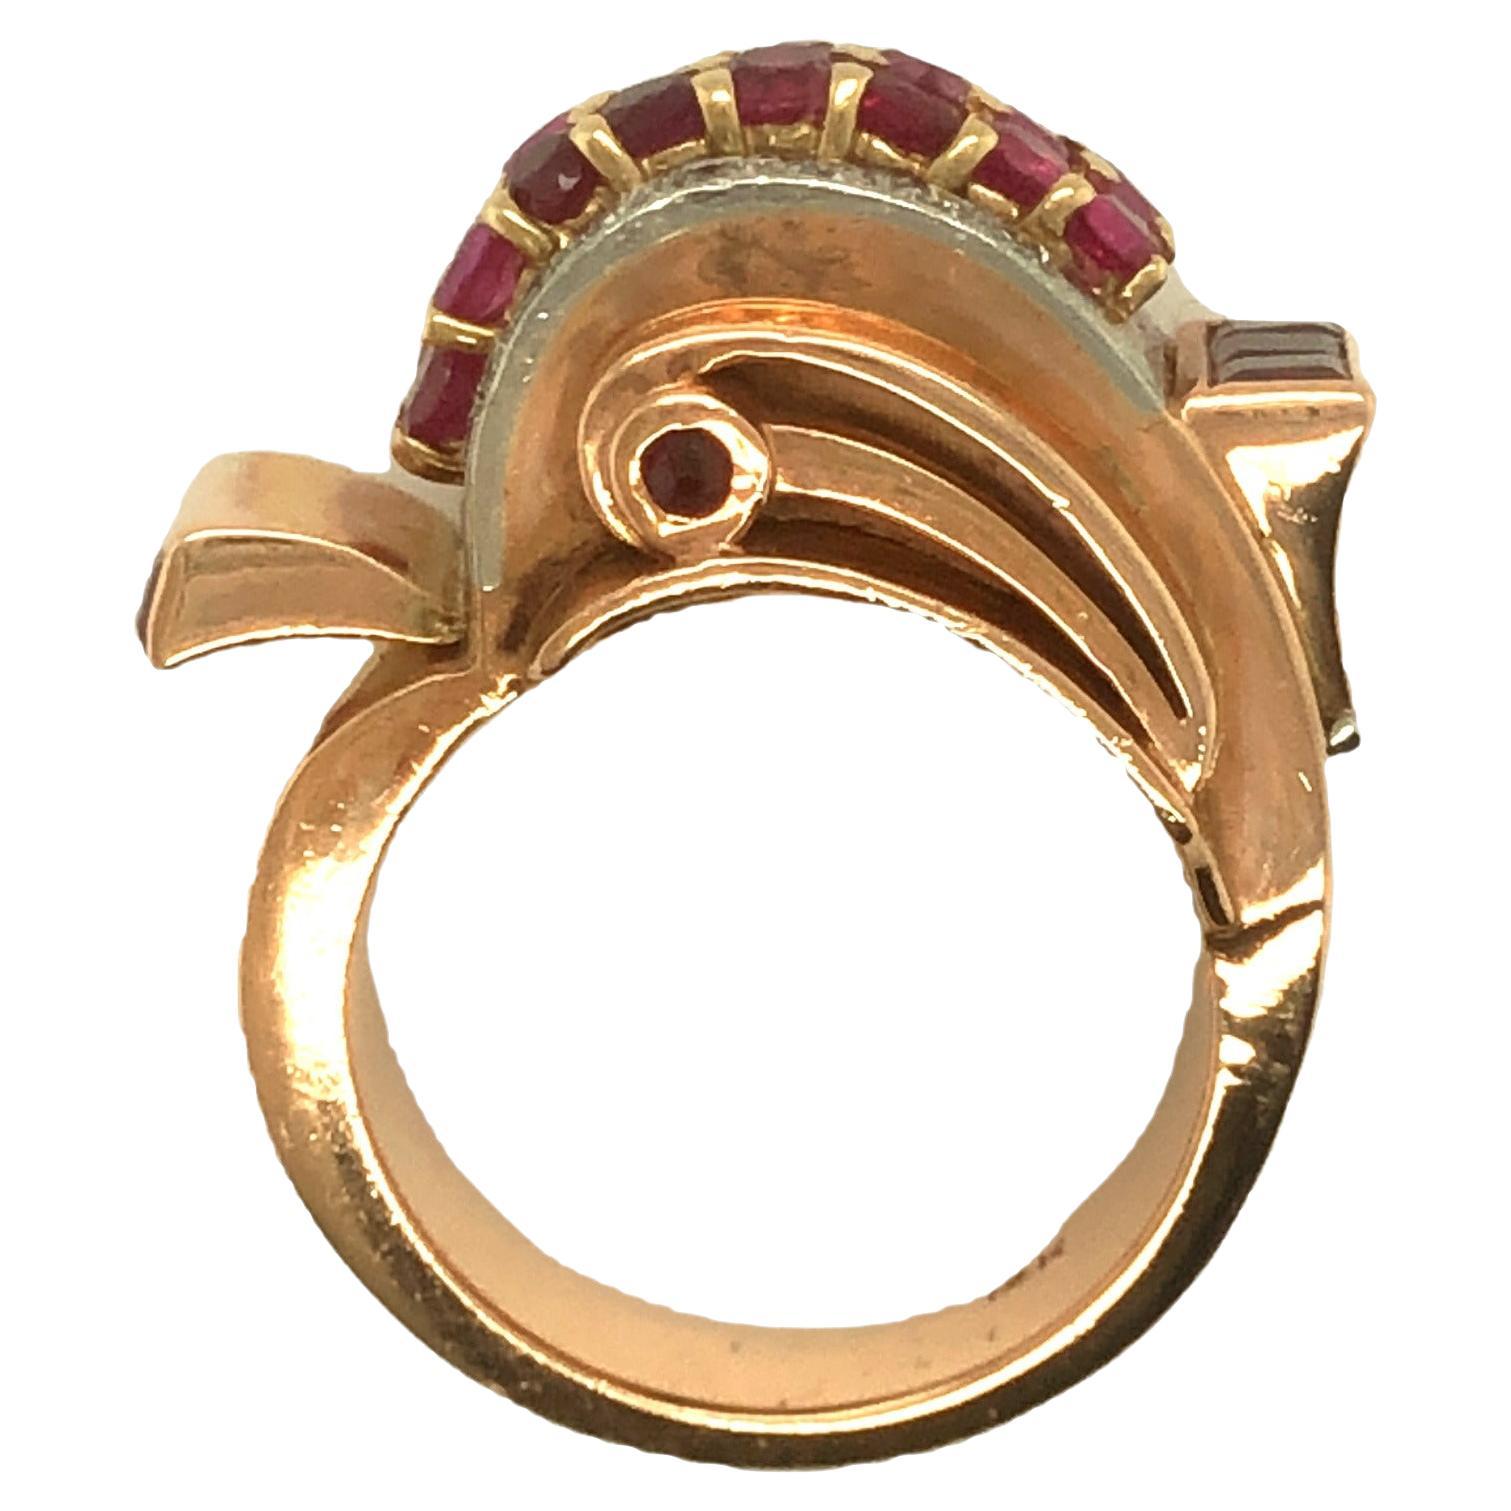 Gorgeous and bold retro ring created in the 1940s was exquisitely designed and crafted in 14K rose gold. It features two rows of round ruby at center. The colorless diamond frame set in white gold to accentuate the whiteness of the diamond. The